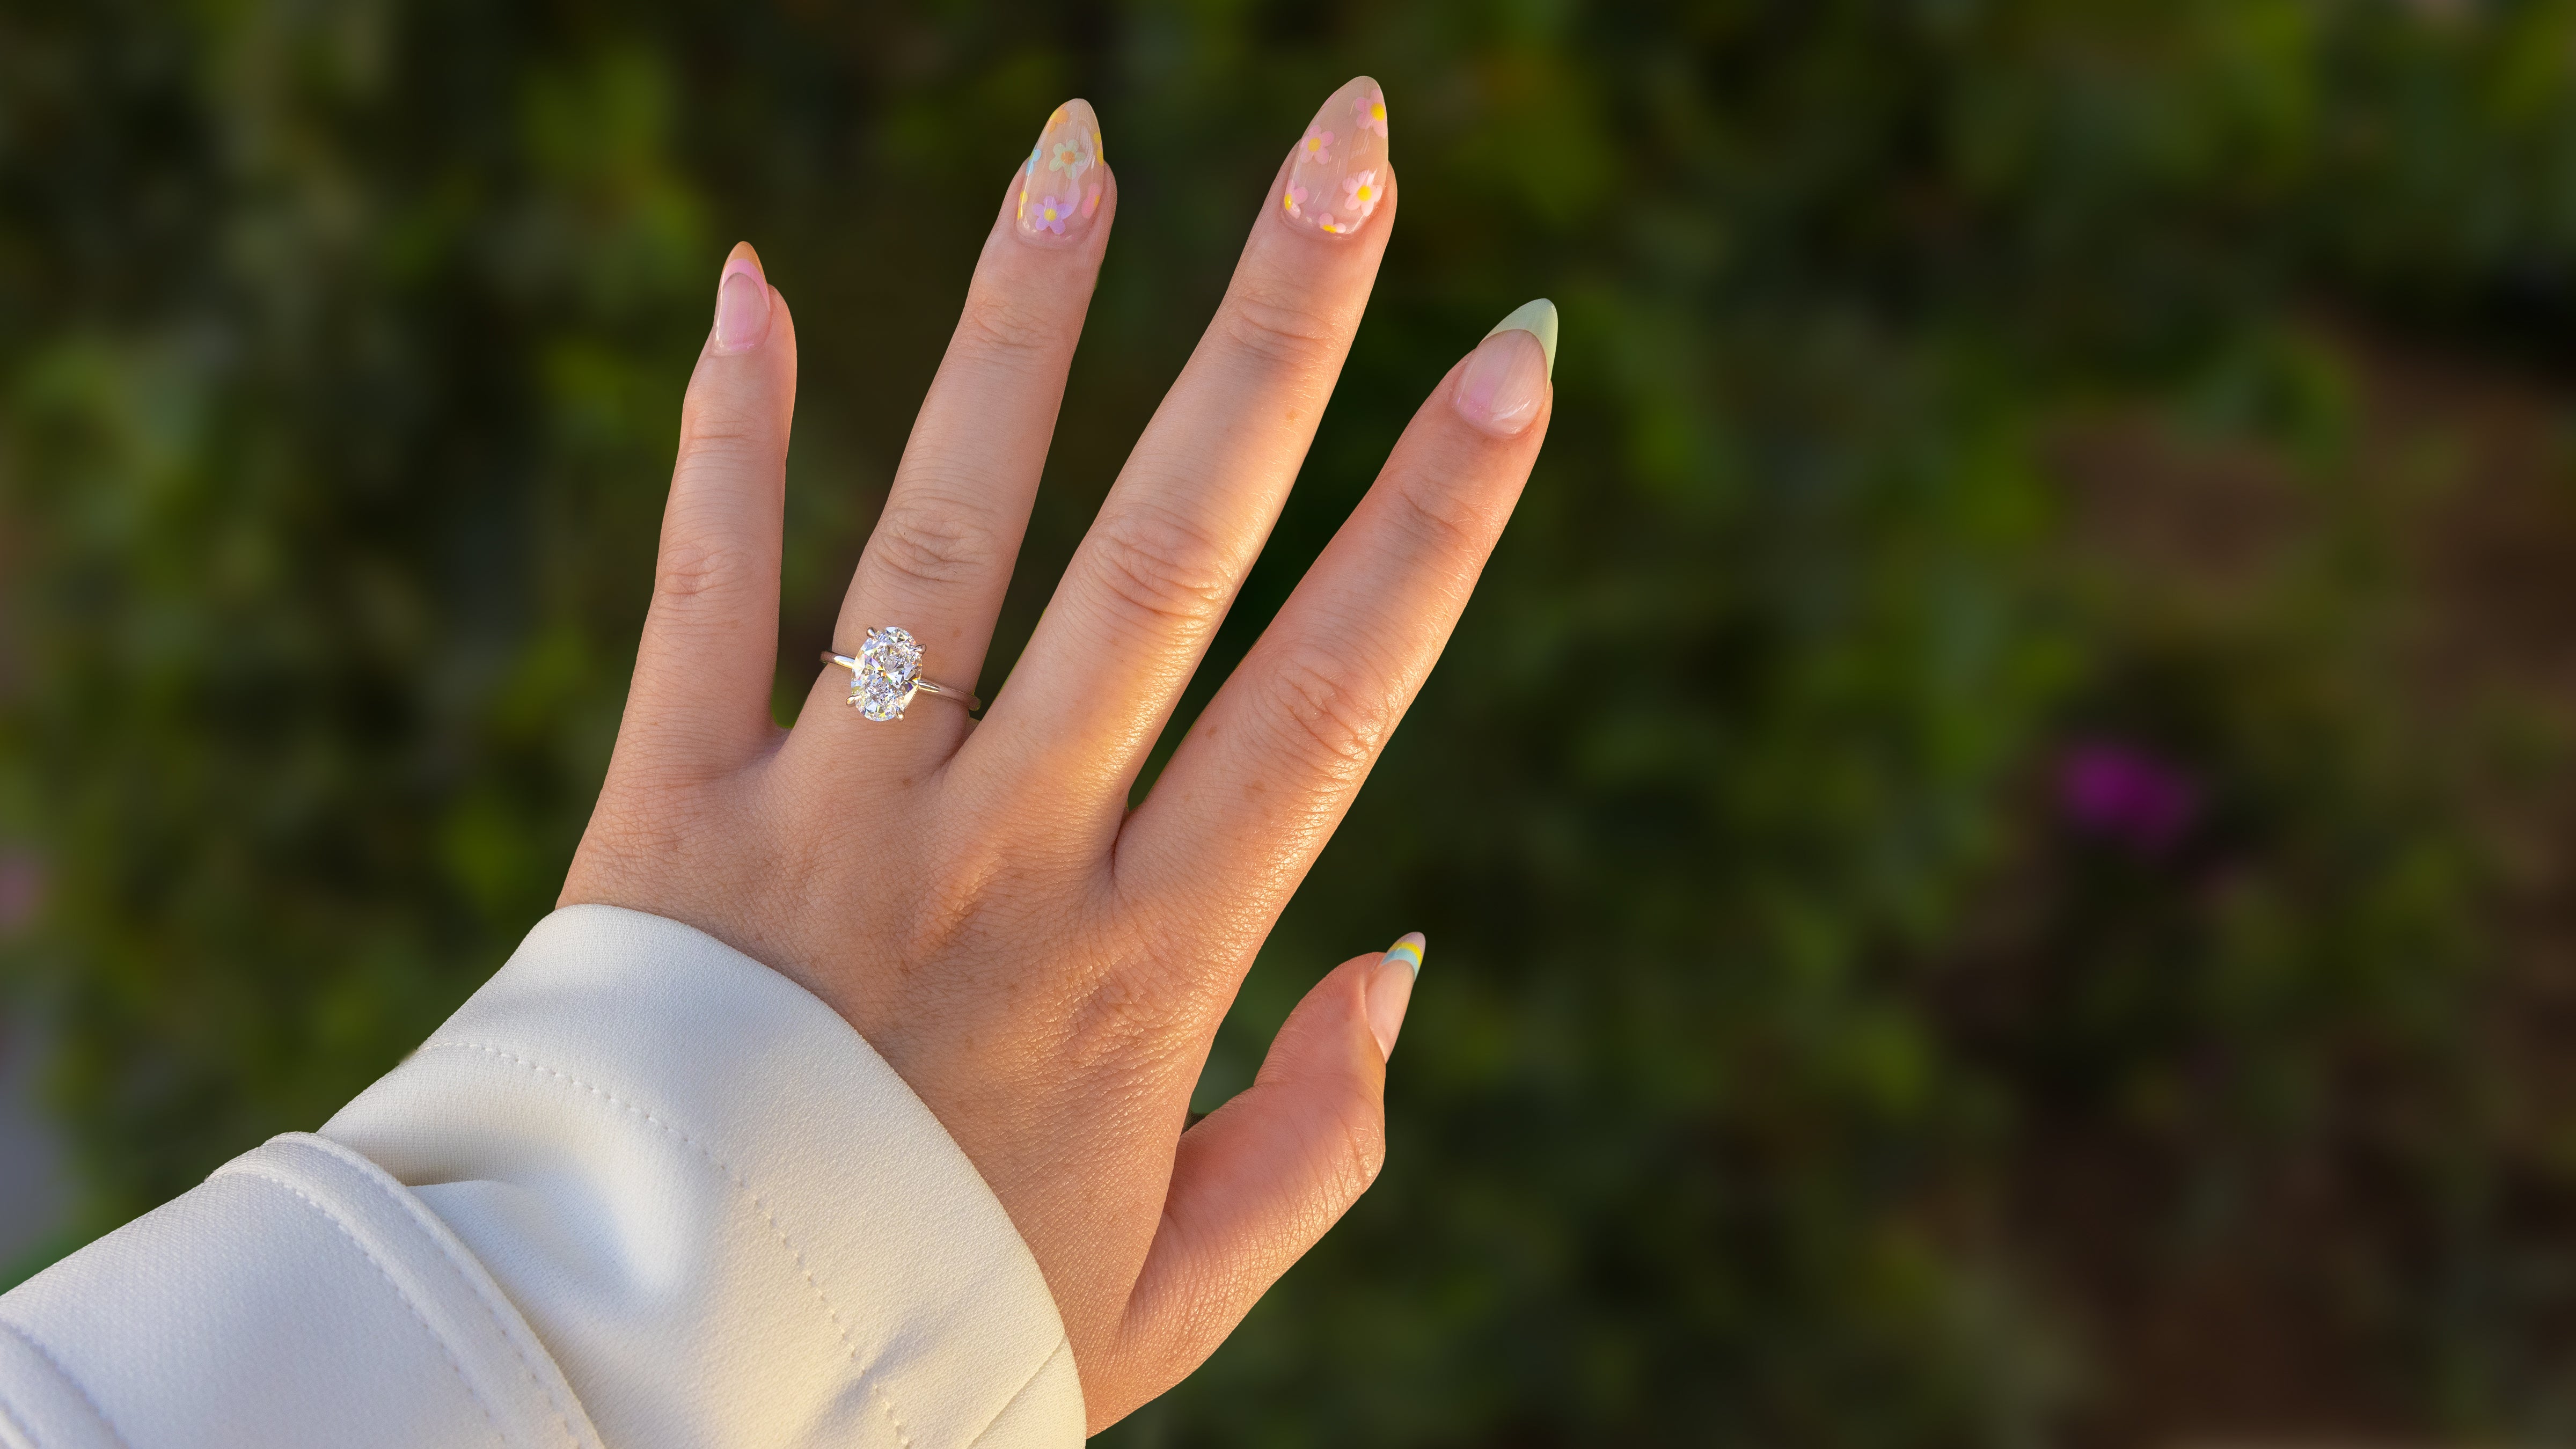 Moonlight Diamonds - Stacking your engagement ring with wedding bands adds  personality, style, and more sparkle. What more could you ask for? 💍 ⠀  Build your dream ring online, then make sure